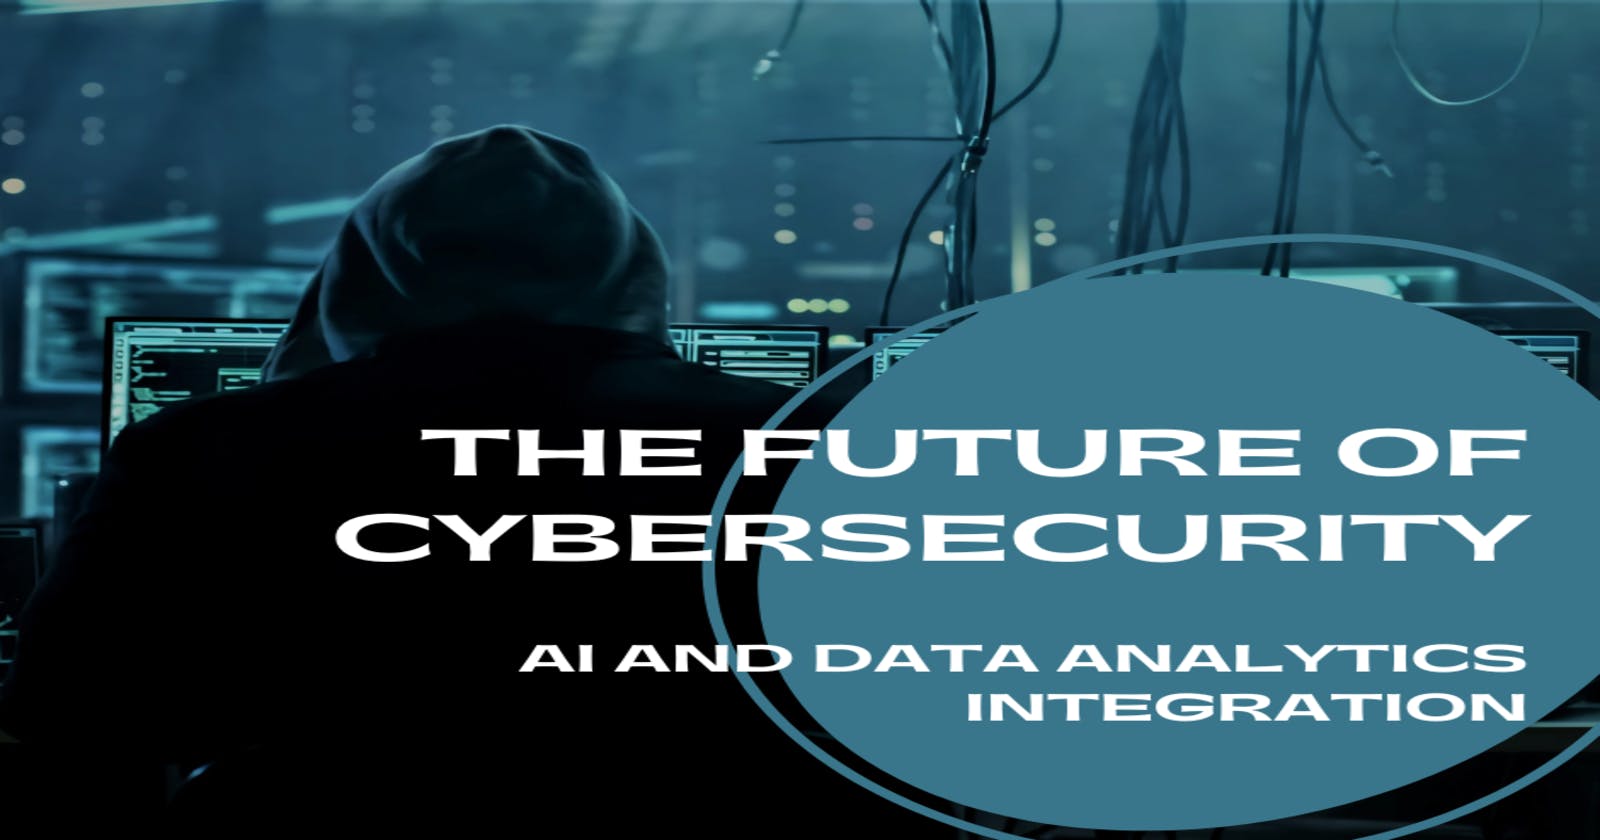 The Future of Cybersecurity: AI and Data Analytics Integration